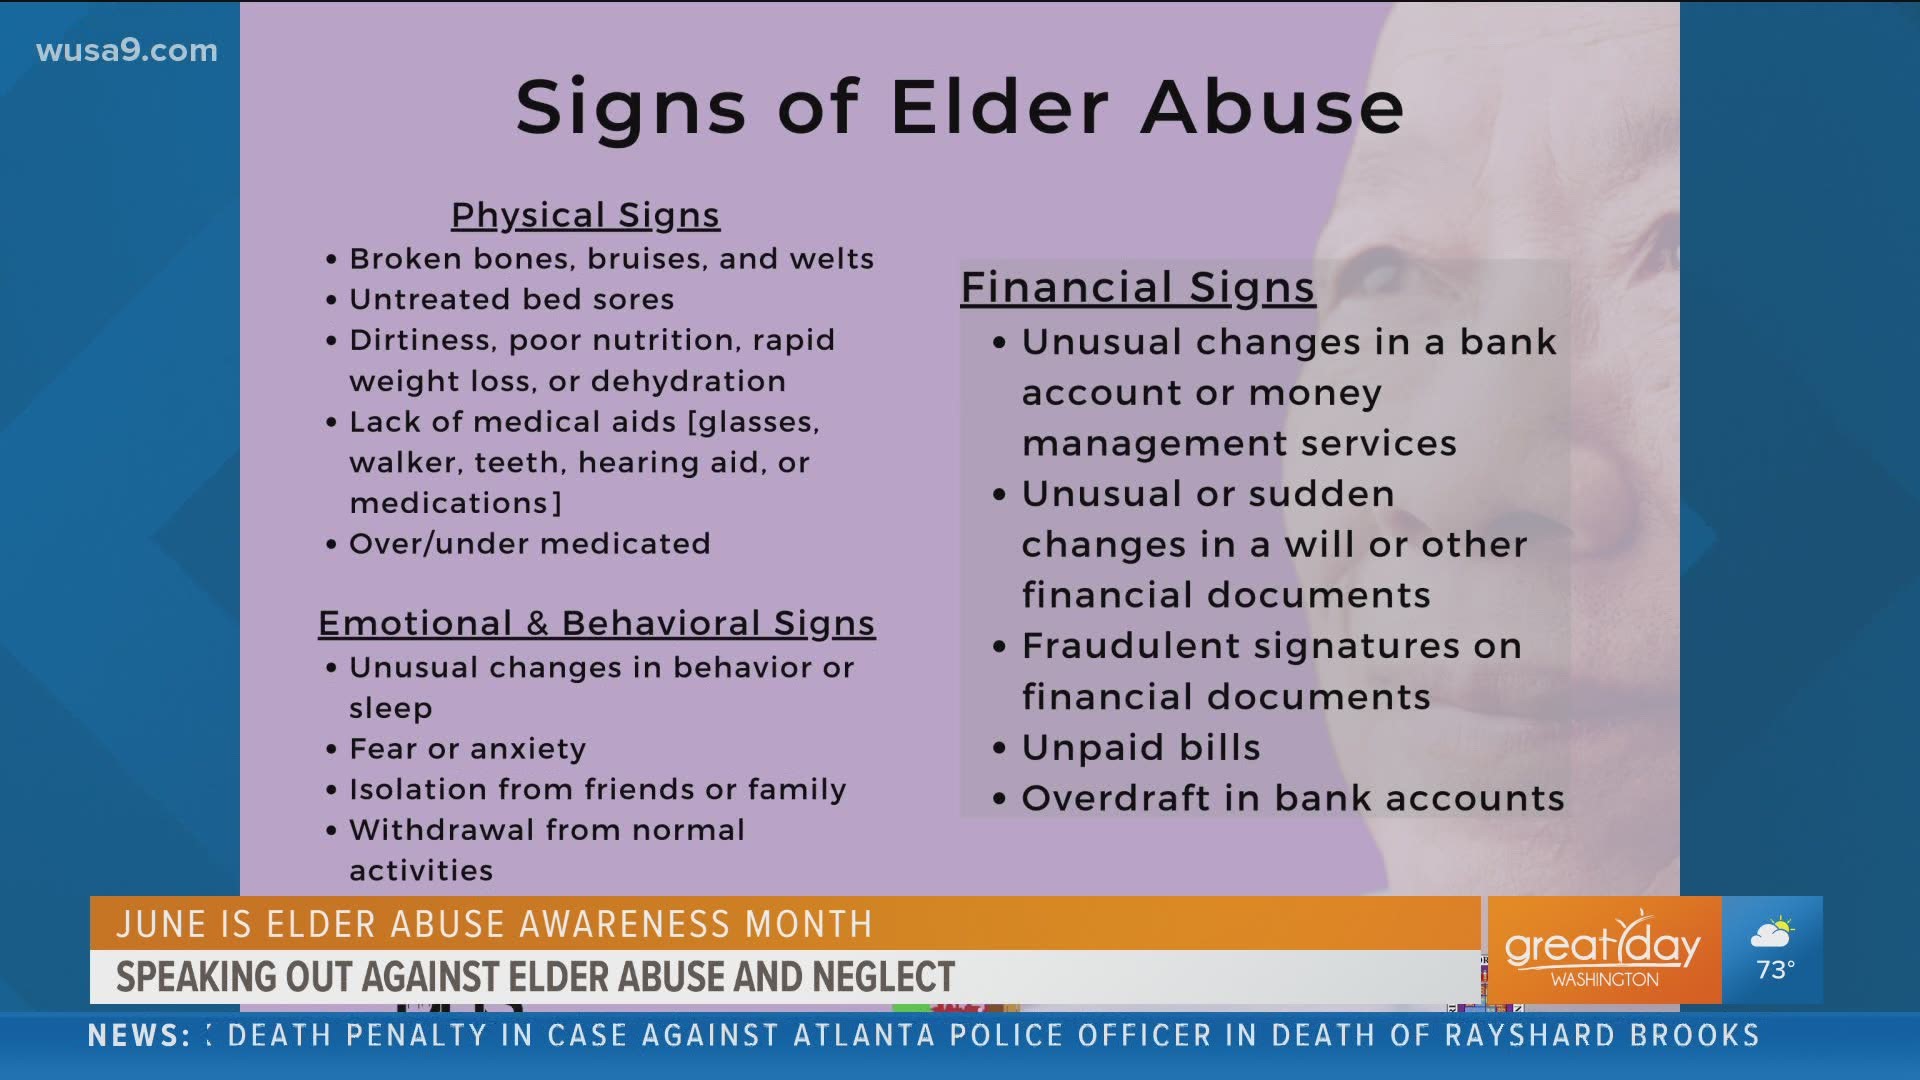 This segment is sponsored by the Prince George's Department of Social Services. To make a report involving elder abuse or neglect, call (301) 909-2450.